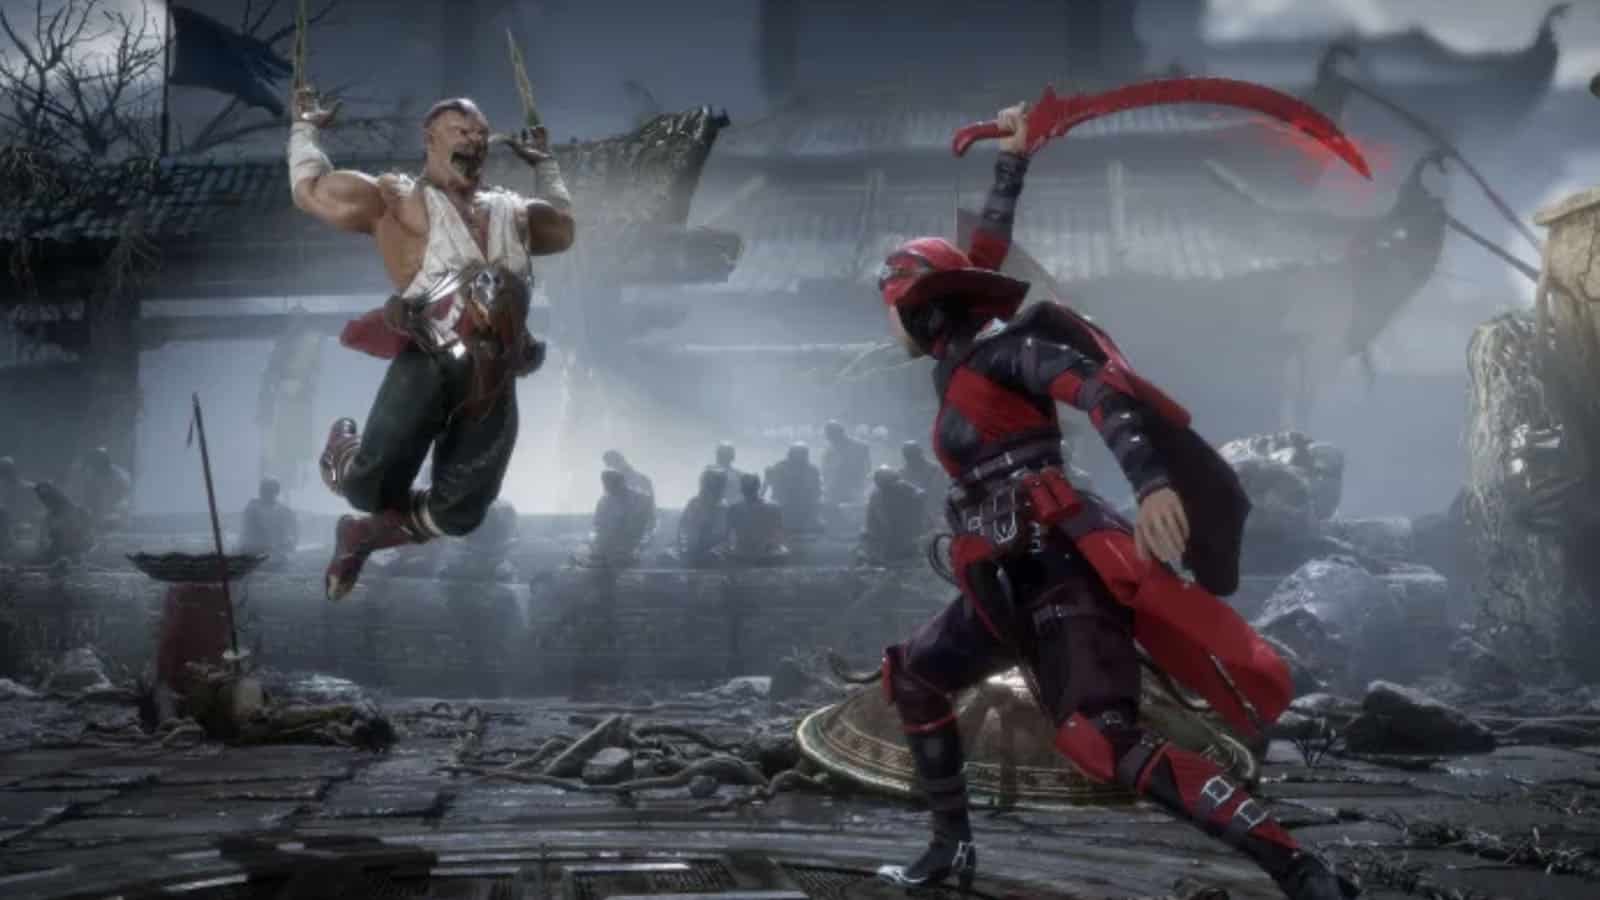 Mortal Kombat 11 crossplay coming to PS4 and Xbox One - Polygon